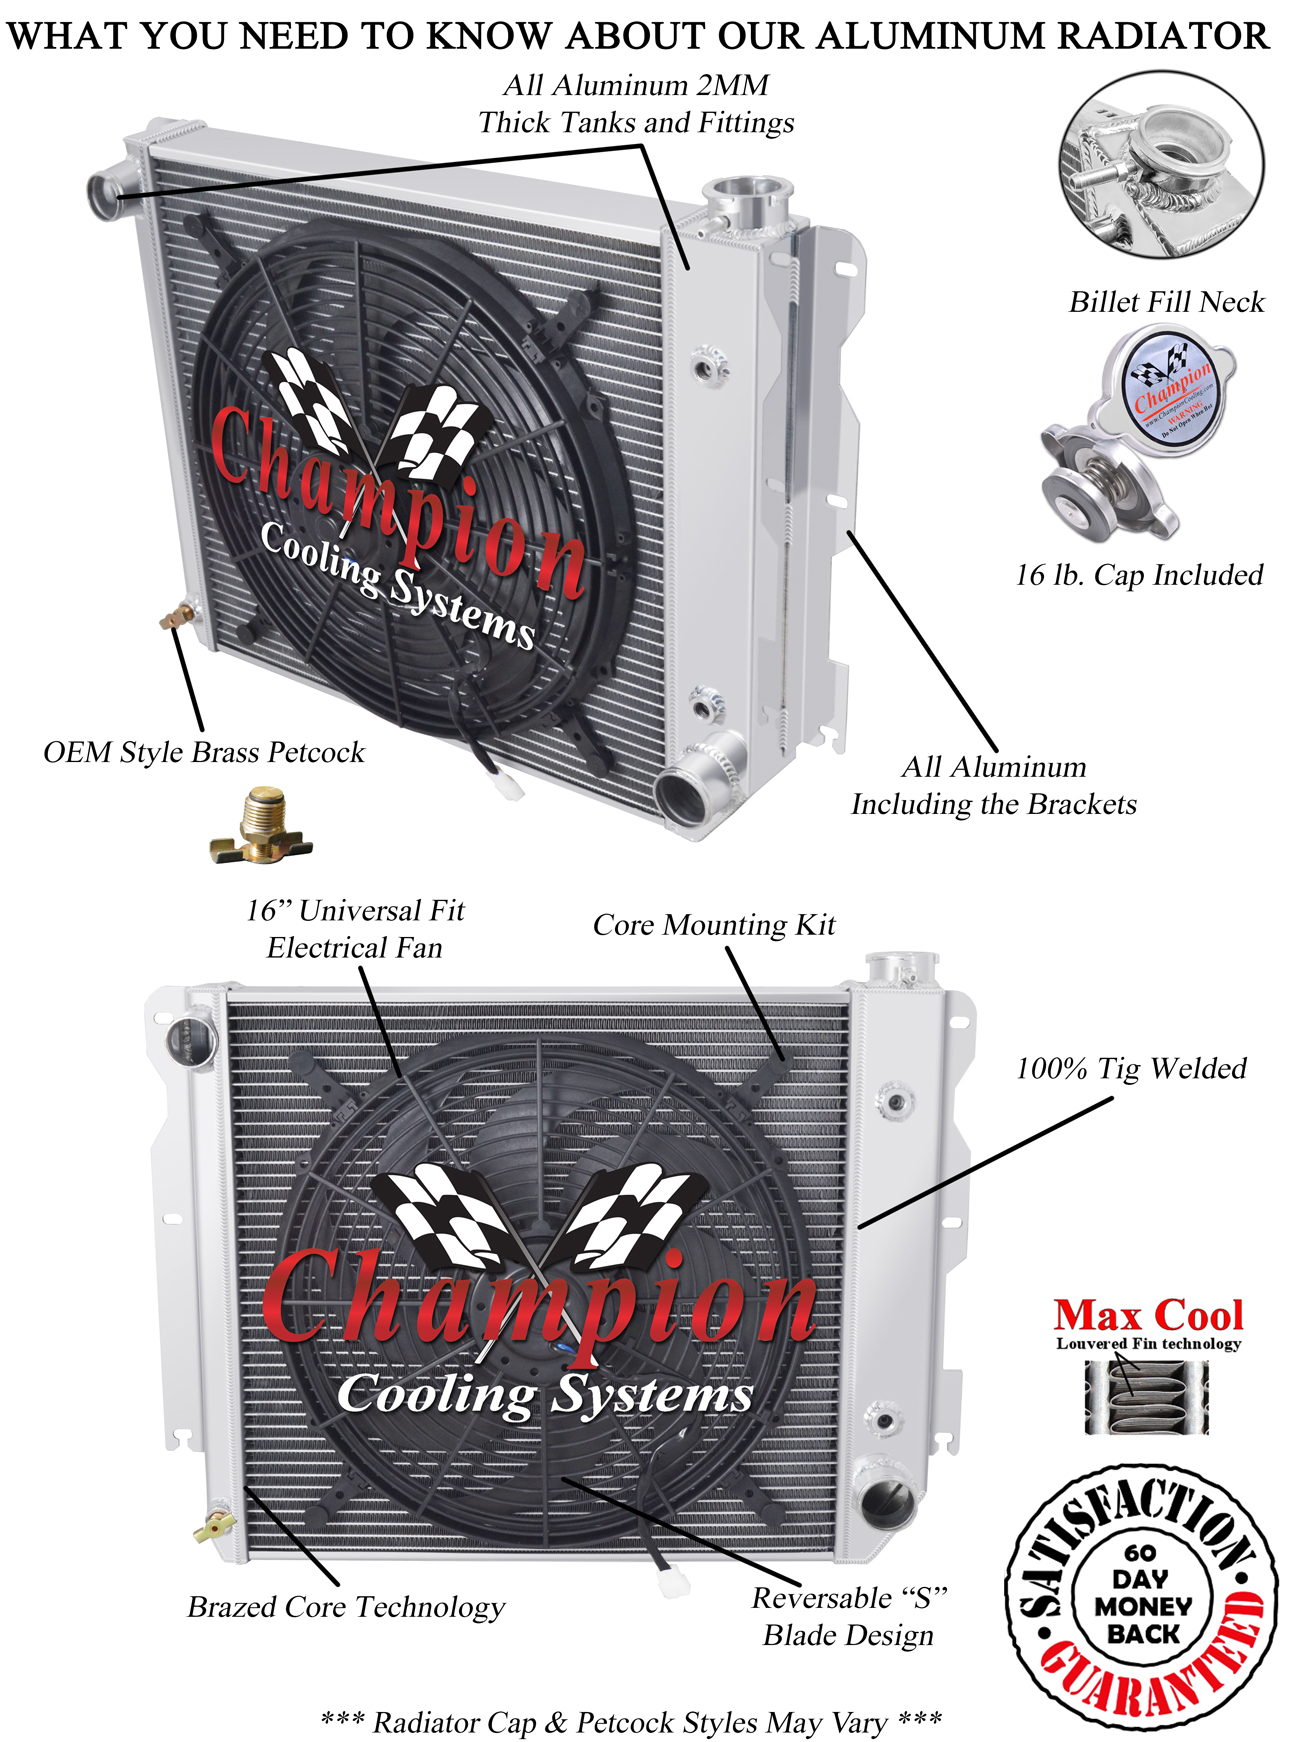 https://www.championcooling.com/photos/Photos%20White/With%20Fans/Combos/8102/16/8102_1f_d_w.jpg